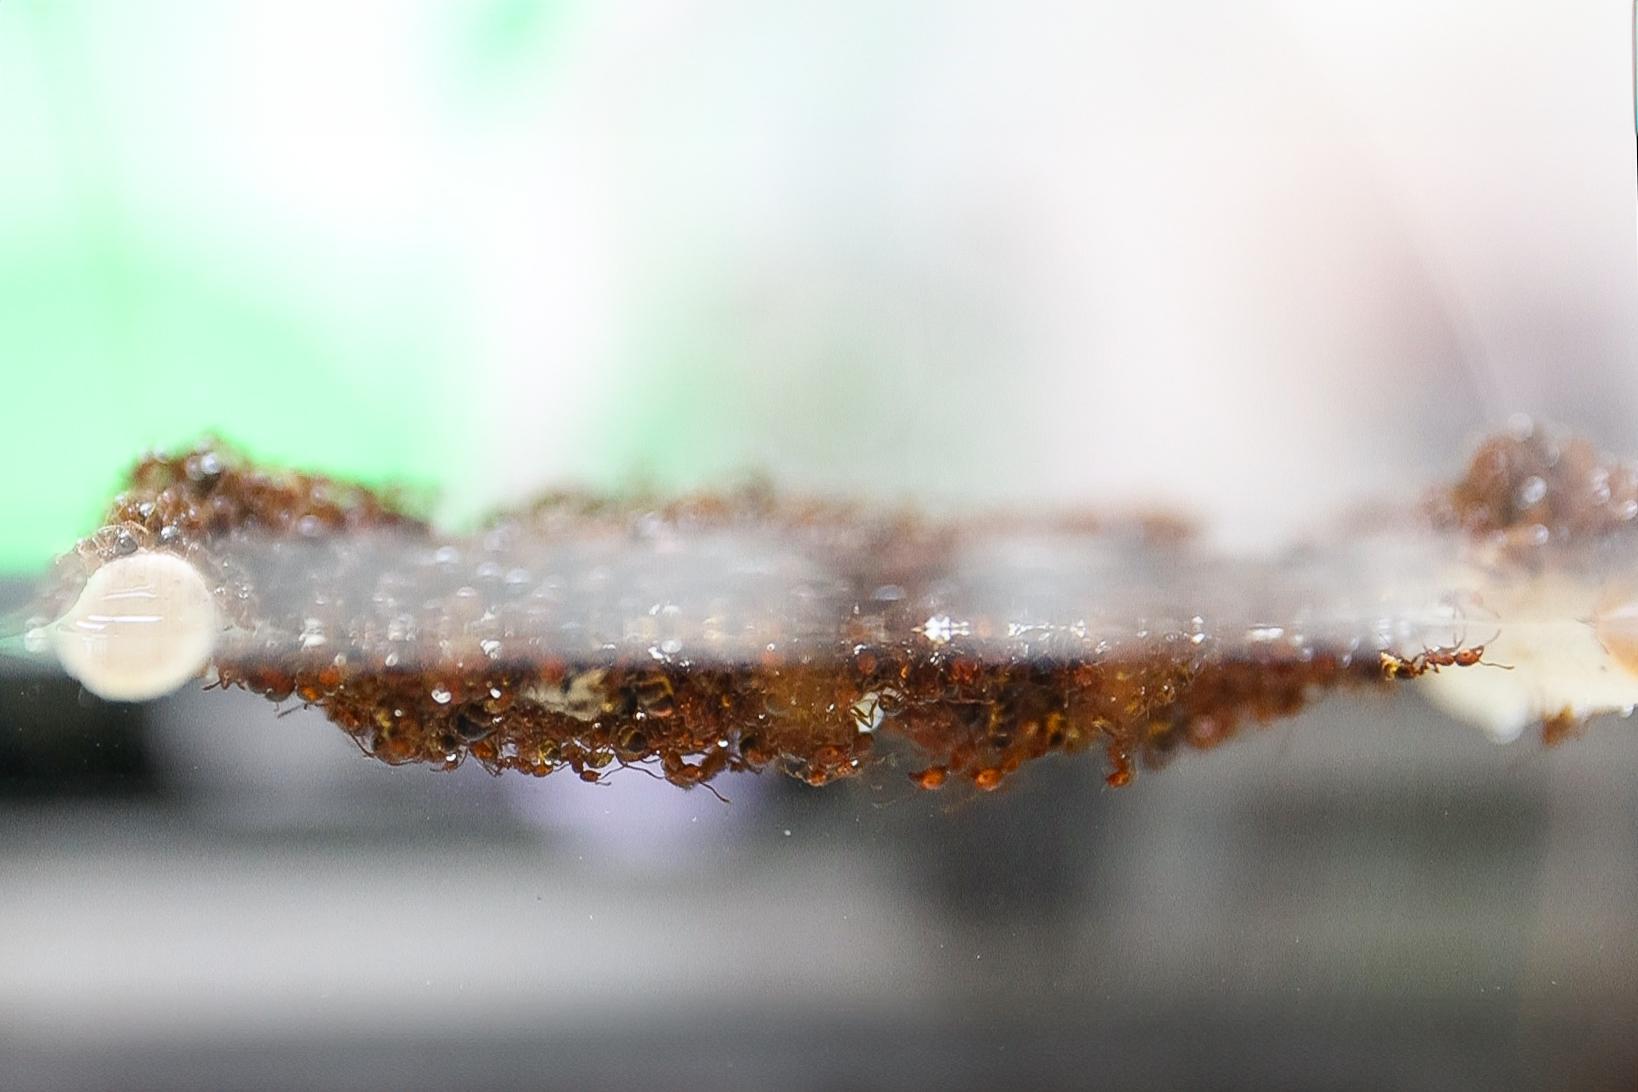 The fire ant colonies grasp each other with their mandibles and legs to form rafts on the water's surface.